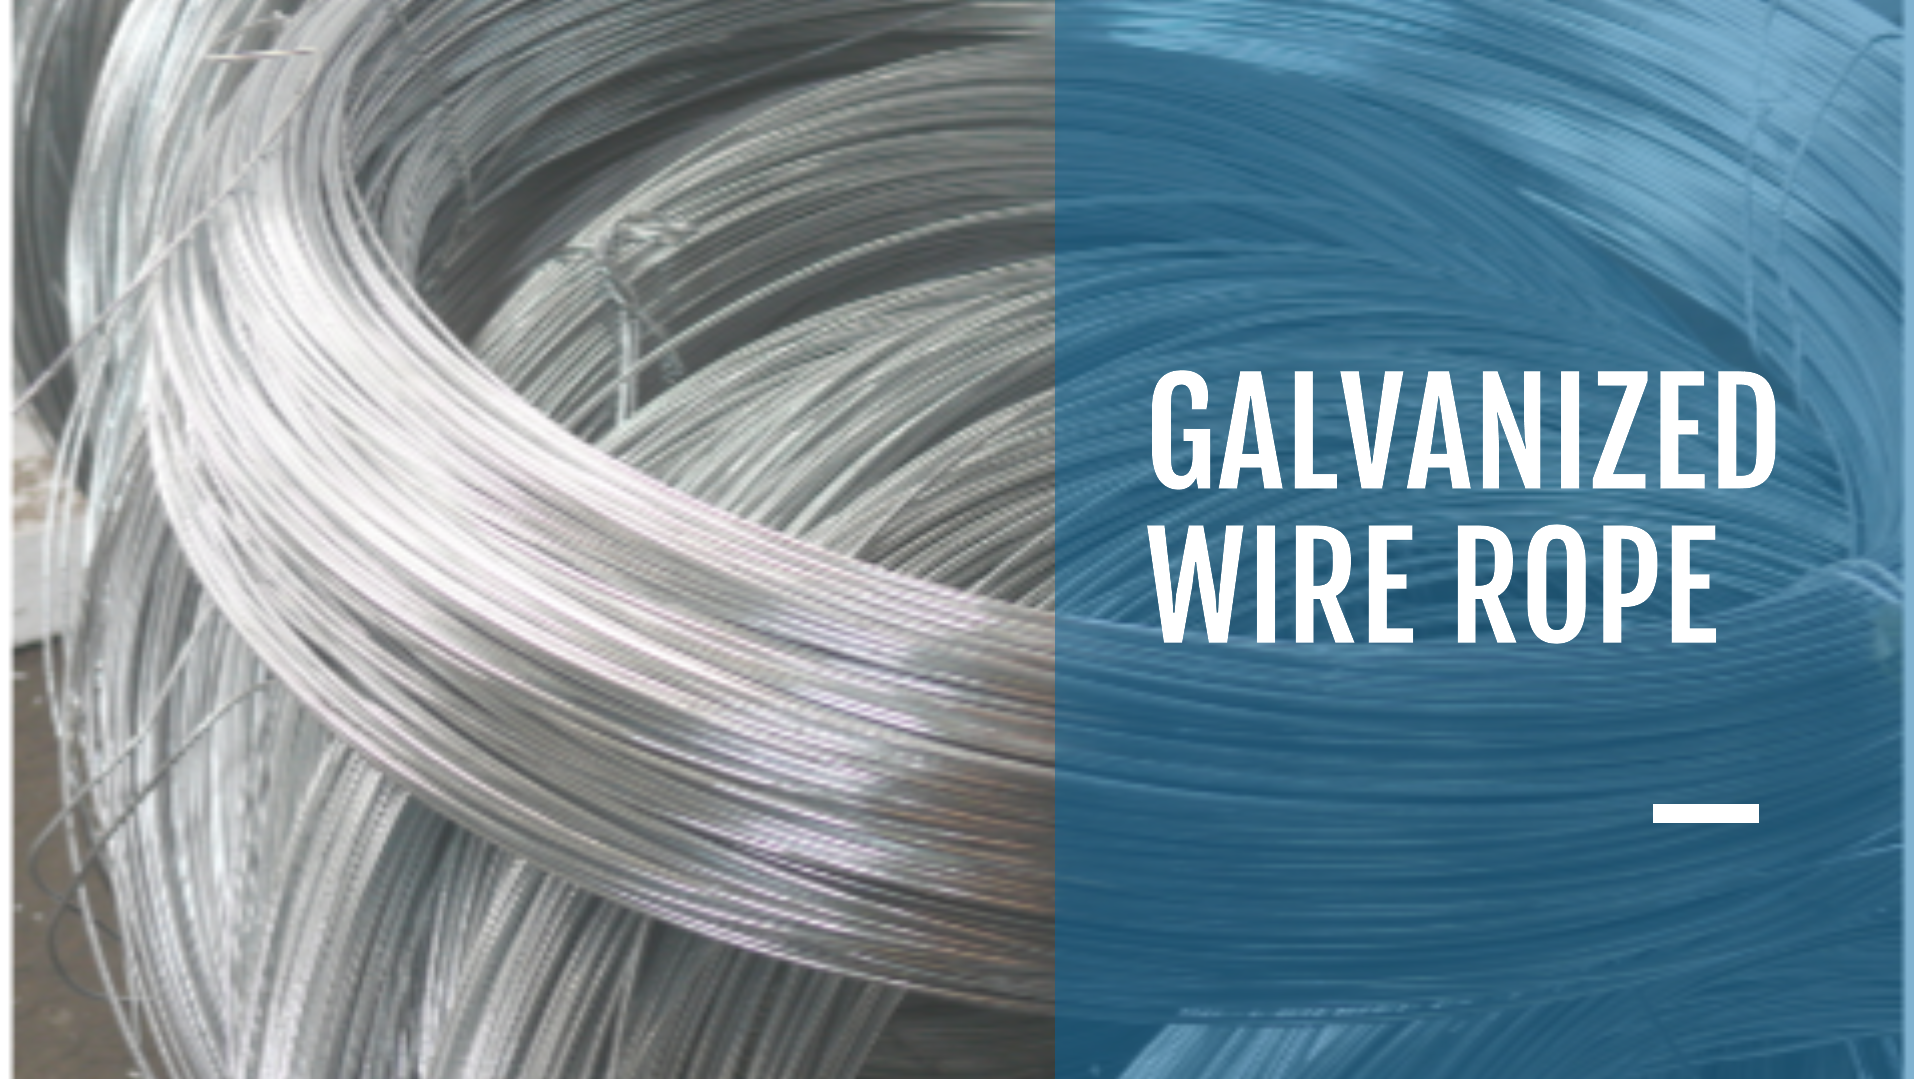 Galvanized Wire ropes Manufacturers, Galvanized Wire - Zinc Coated Wire, Galvanized Wires, Galvanized Wire ropes supplie